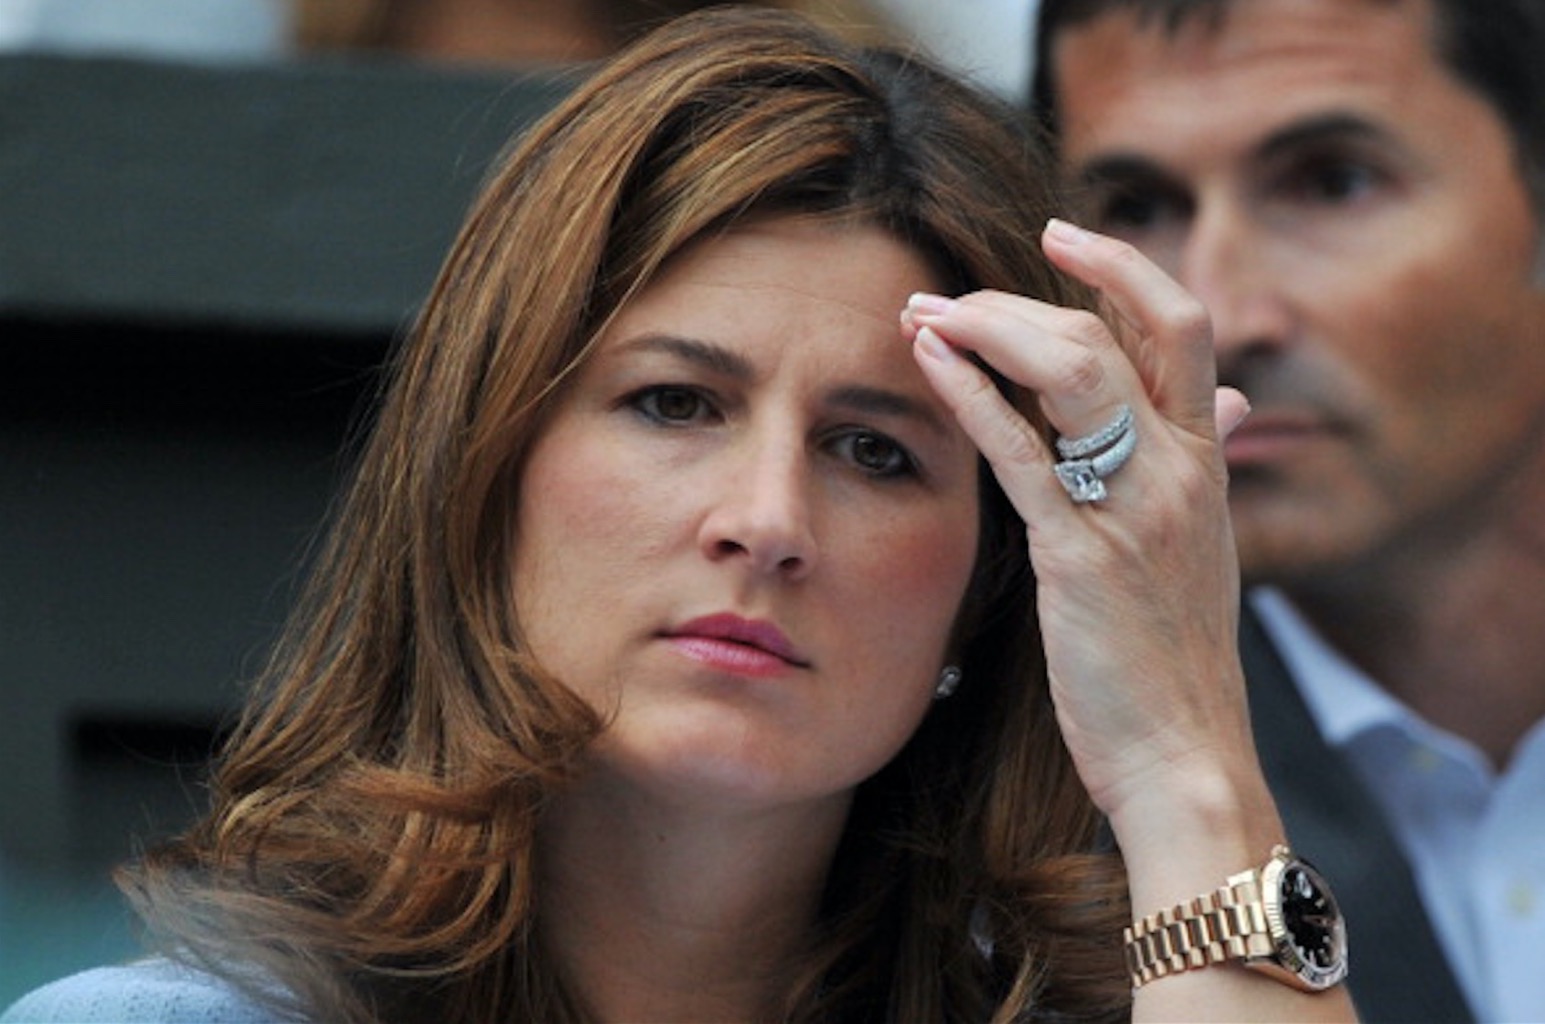 At the 2014 Wimbledon Championships, Mirka Federer watch her husband play while wearing her original emerald-cut diamond engagement ring and diamond wedding band. Photo Getty